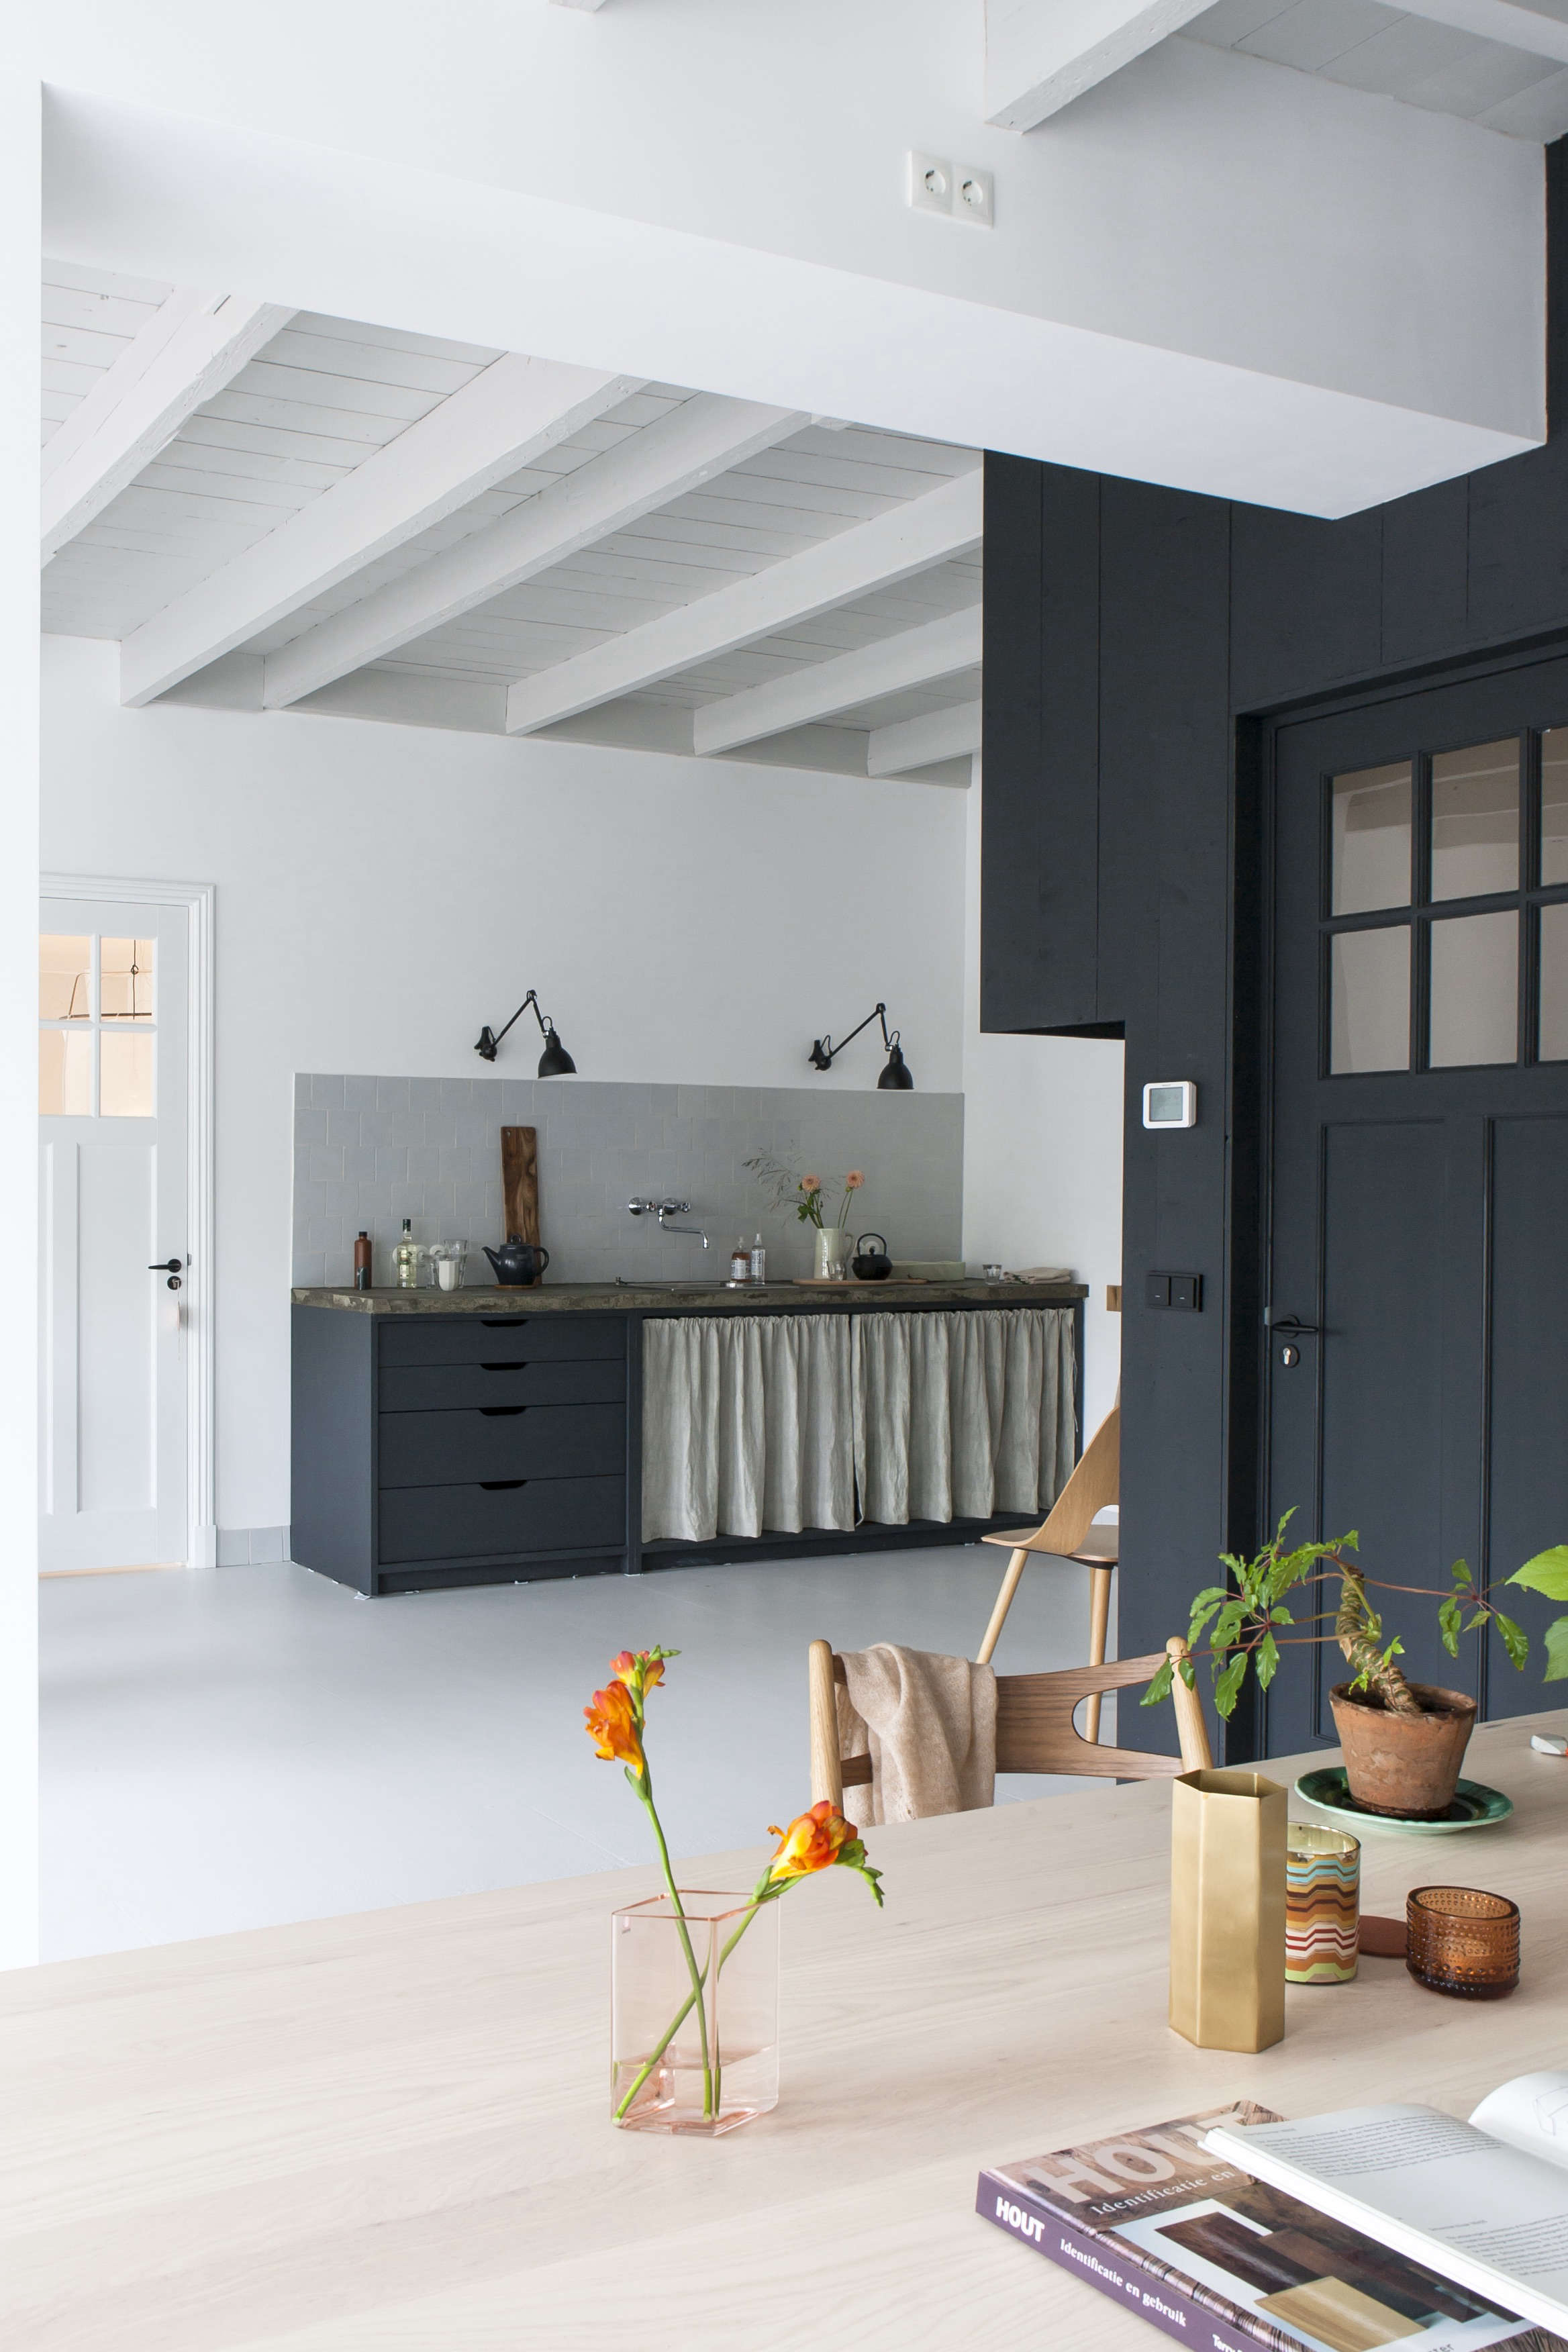 Kitchen of the Week: The Curtained Kitchen, Dutch Modern Edition